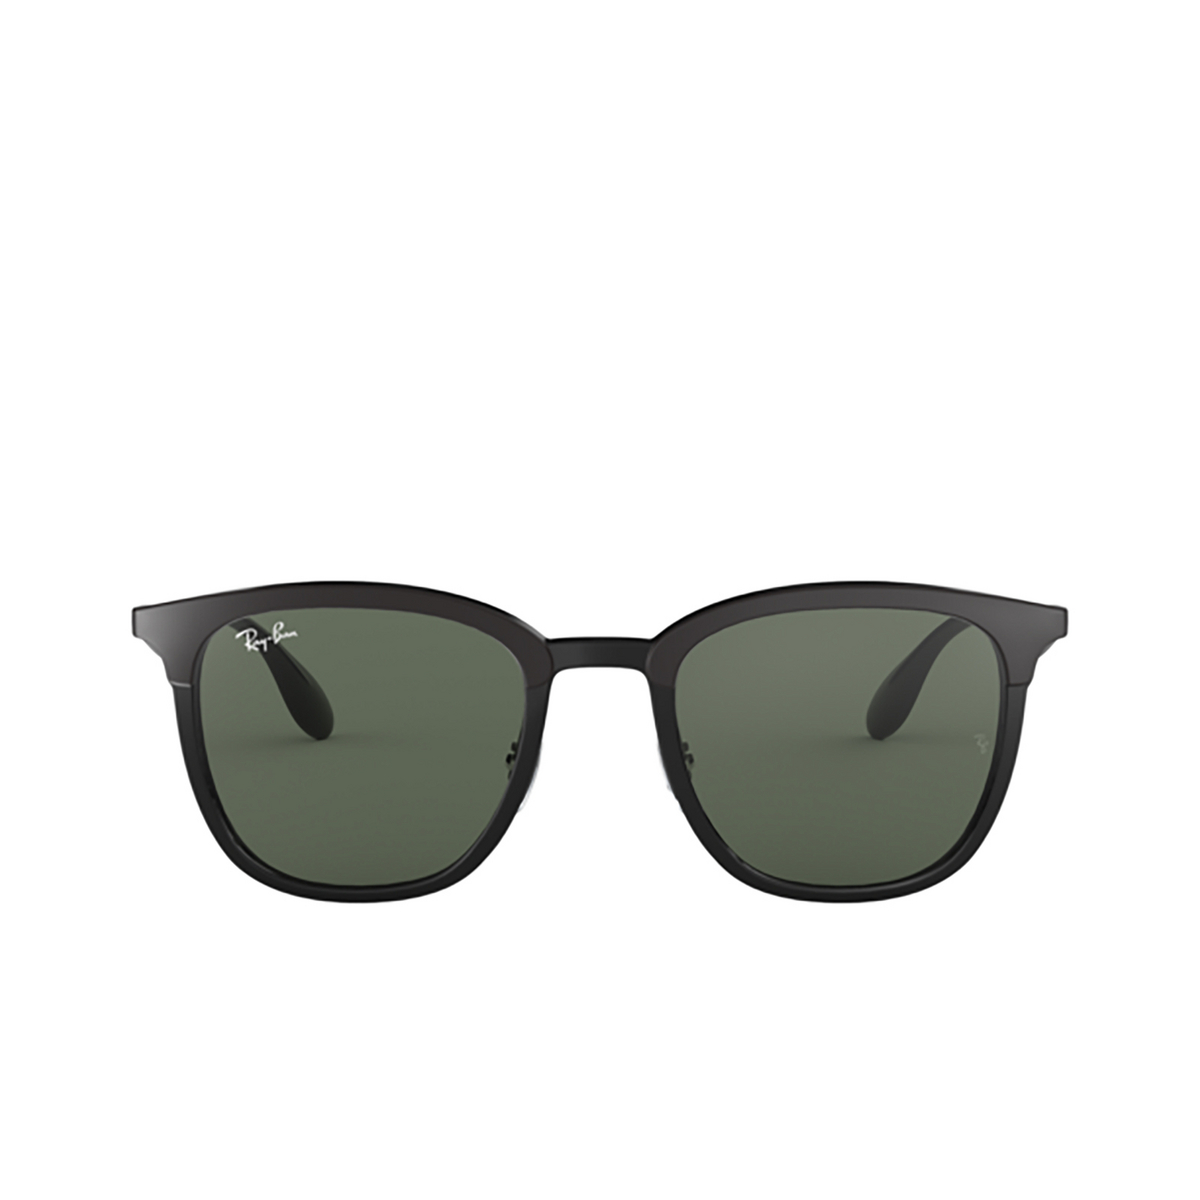 Ray-Ban RB4278 Sunglasses 628271 BLACK / MATTE BLACK - front view